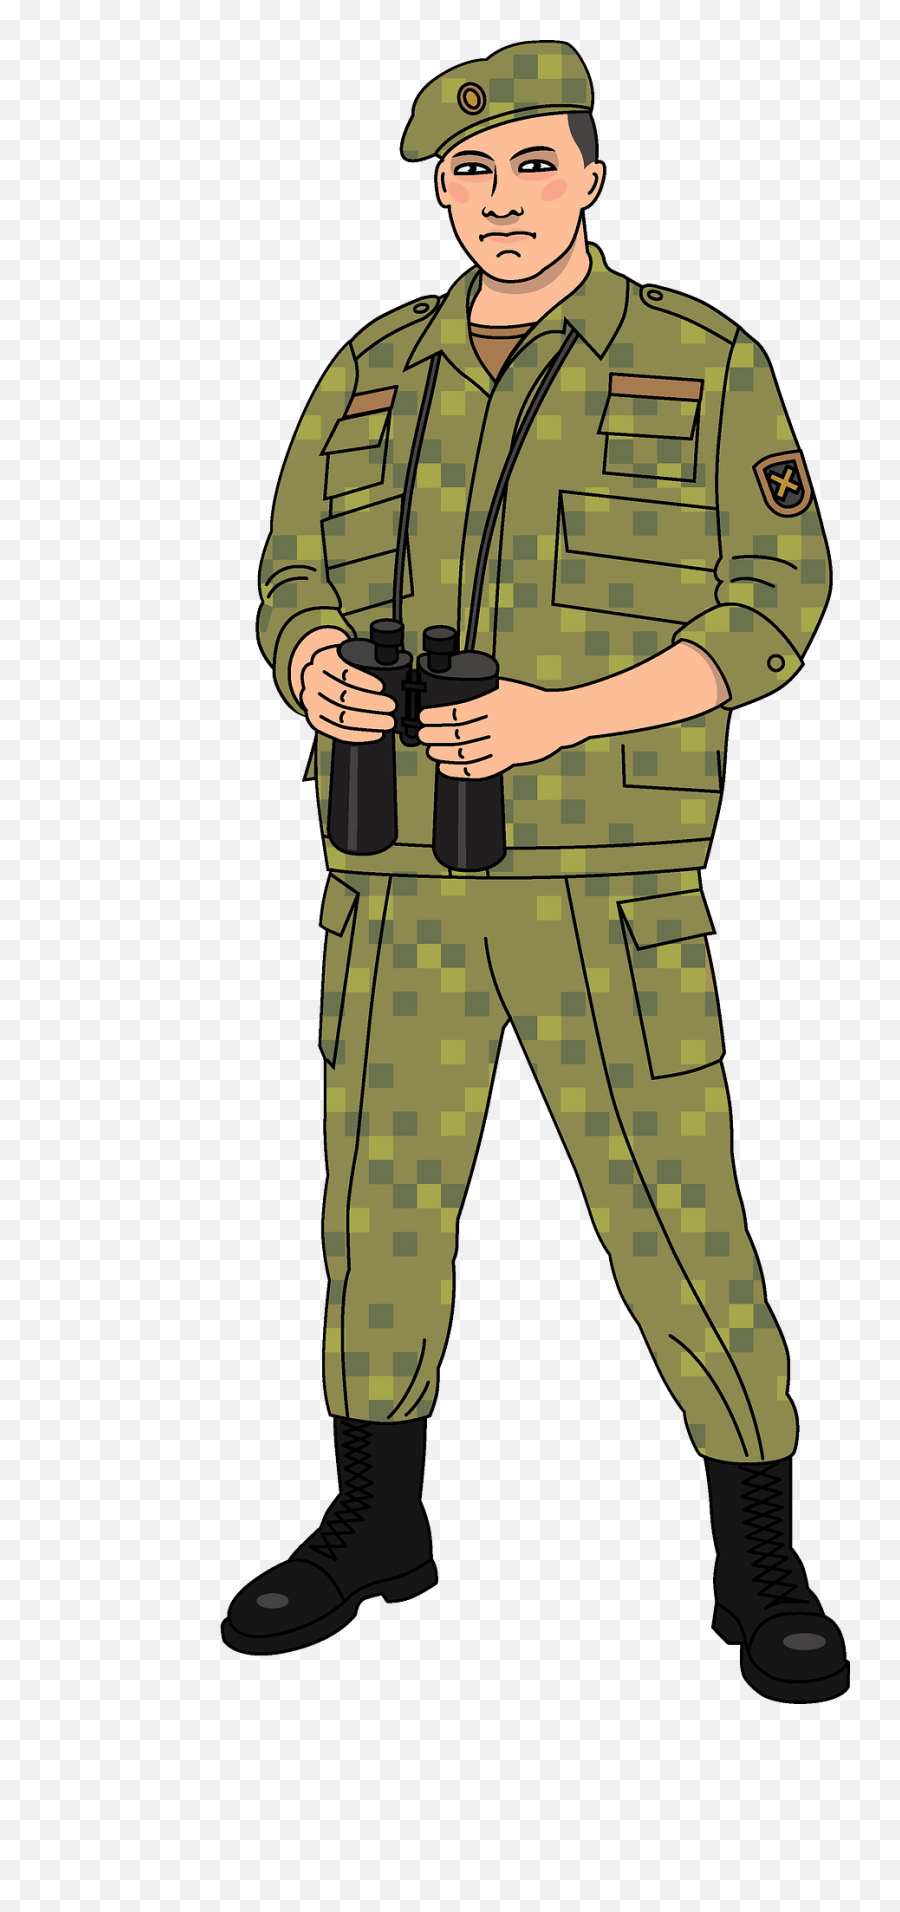 Soldier Clipart Free Download Transparent Png Creazilla - Clipart Image Of Soldier,Soldier Transparent